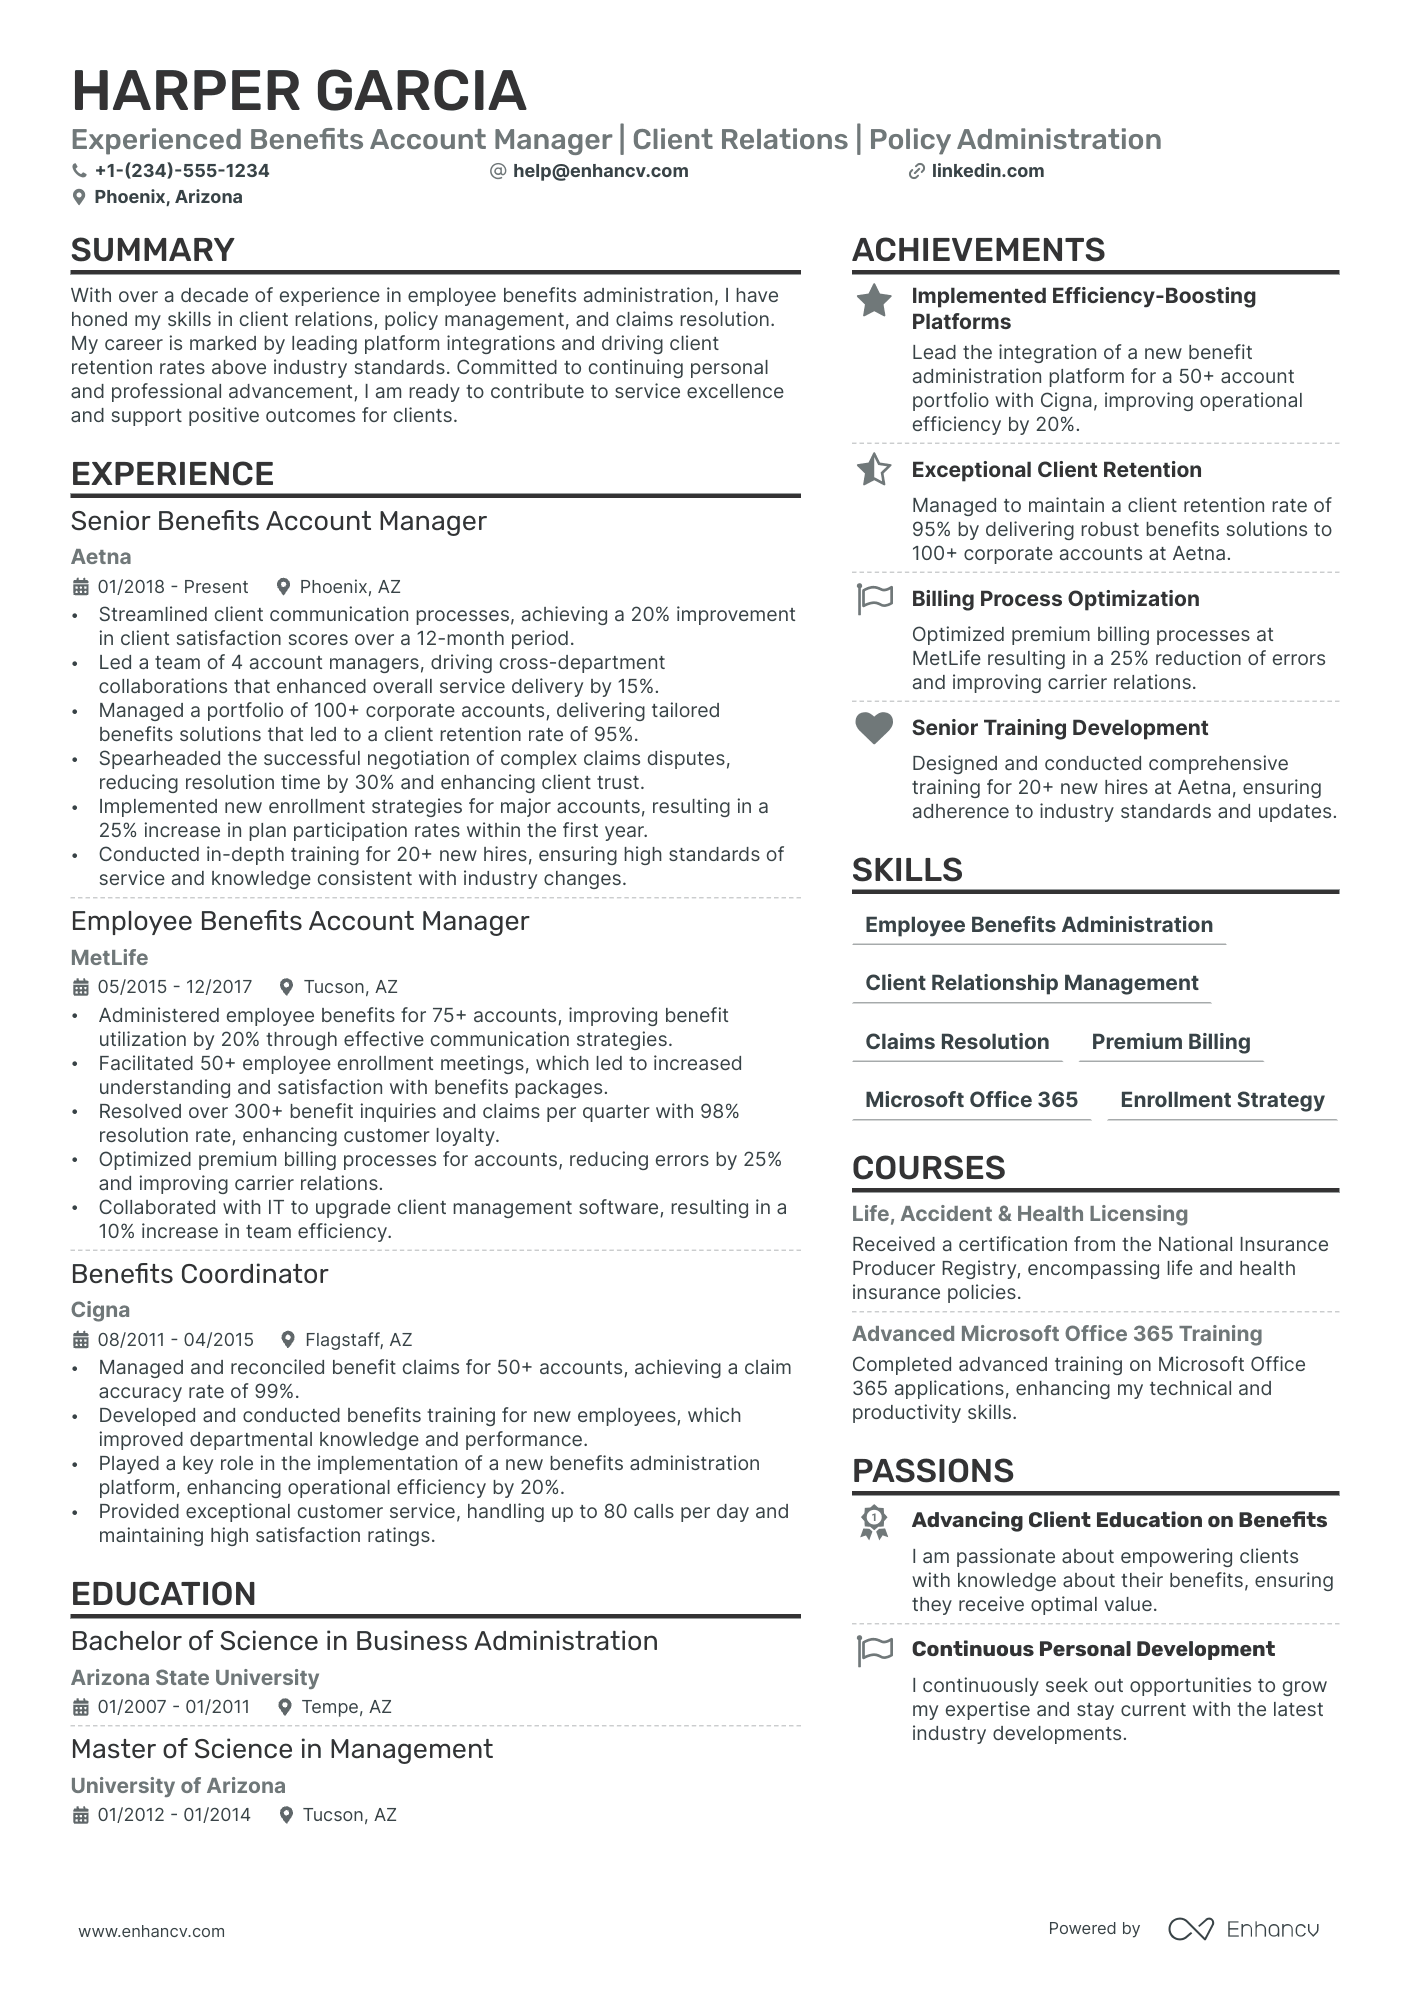 Client Account Manager resume example